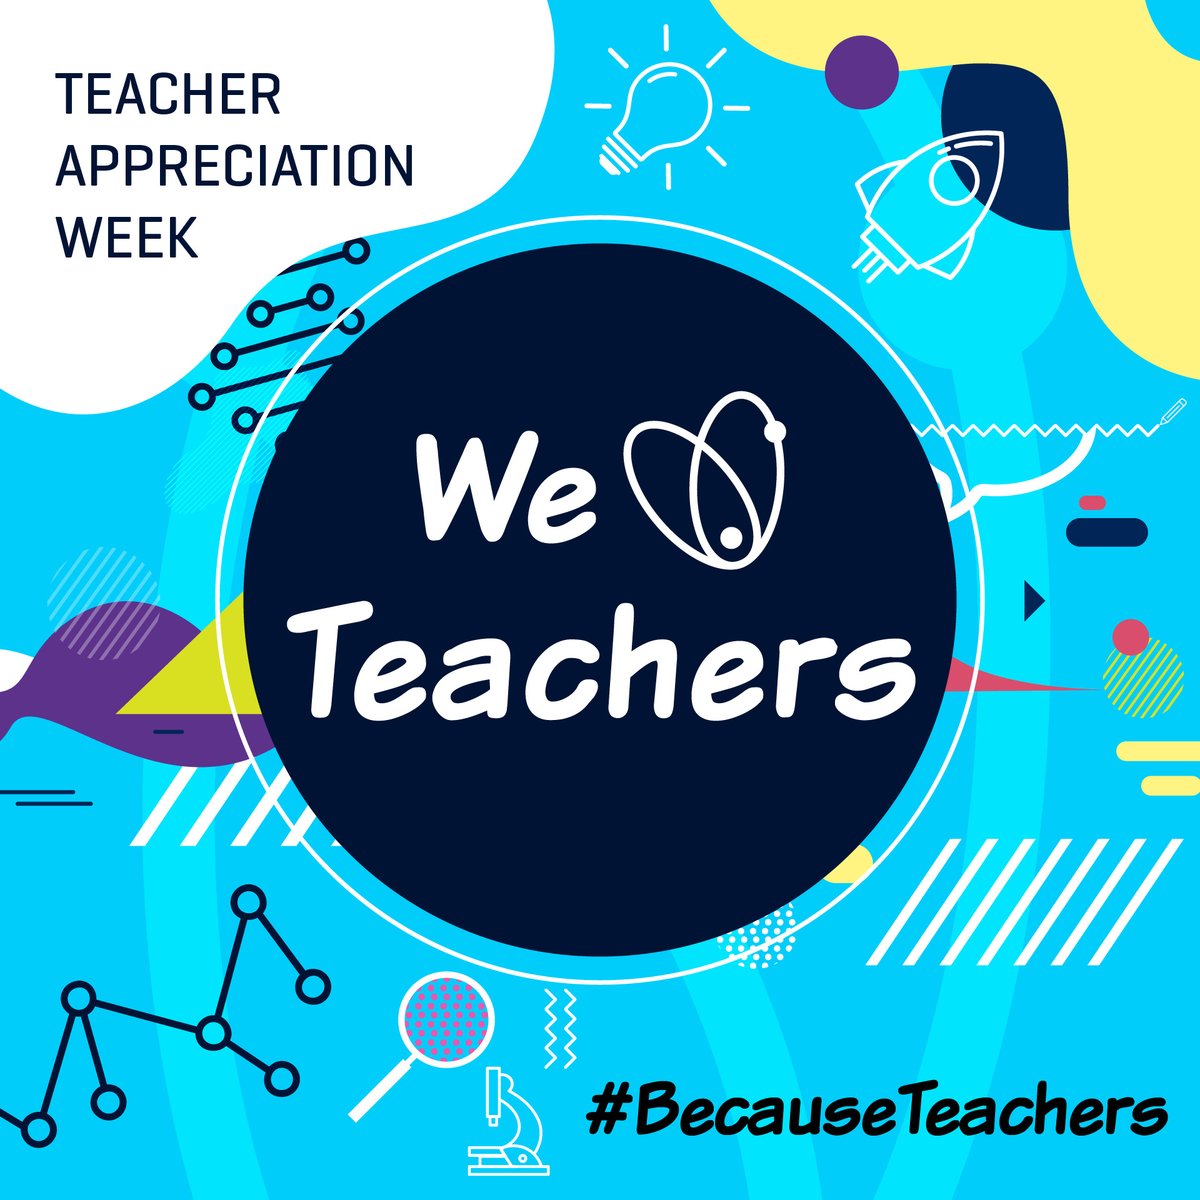 #NSTA is proud to celebrate #teacherappreciationweek! We are kicking off the celebration with a blog post from President Julie Luft and a special thank you video from CEO Erika Shugart, found at bit.ly/3Wsf6SM Join us this week in celebrating educators! #BecauseTeachers